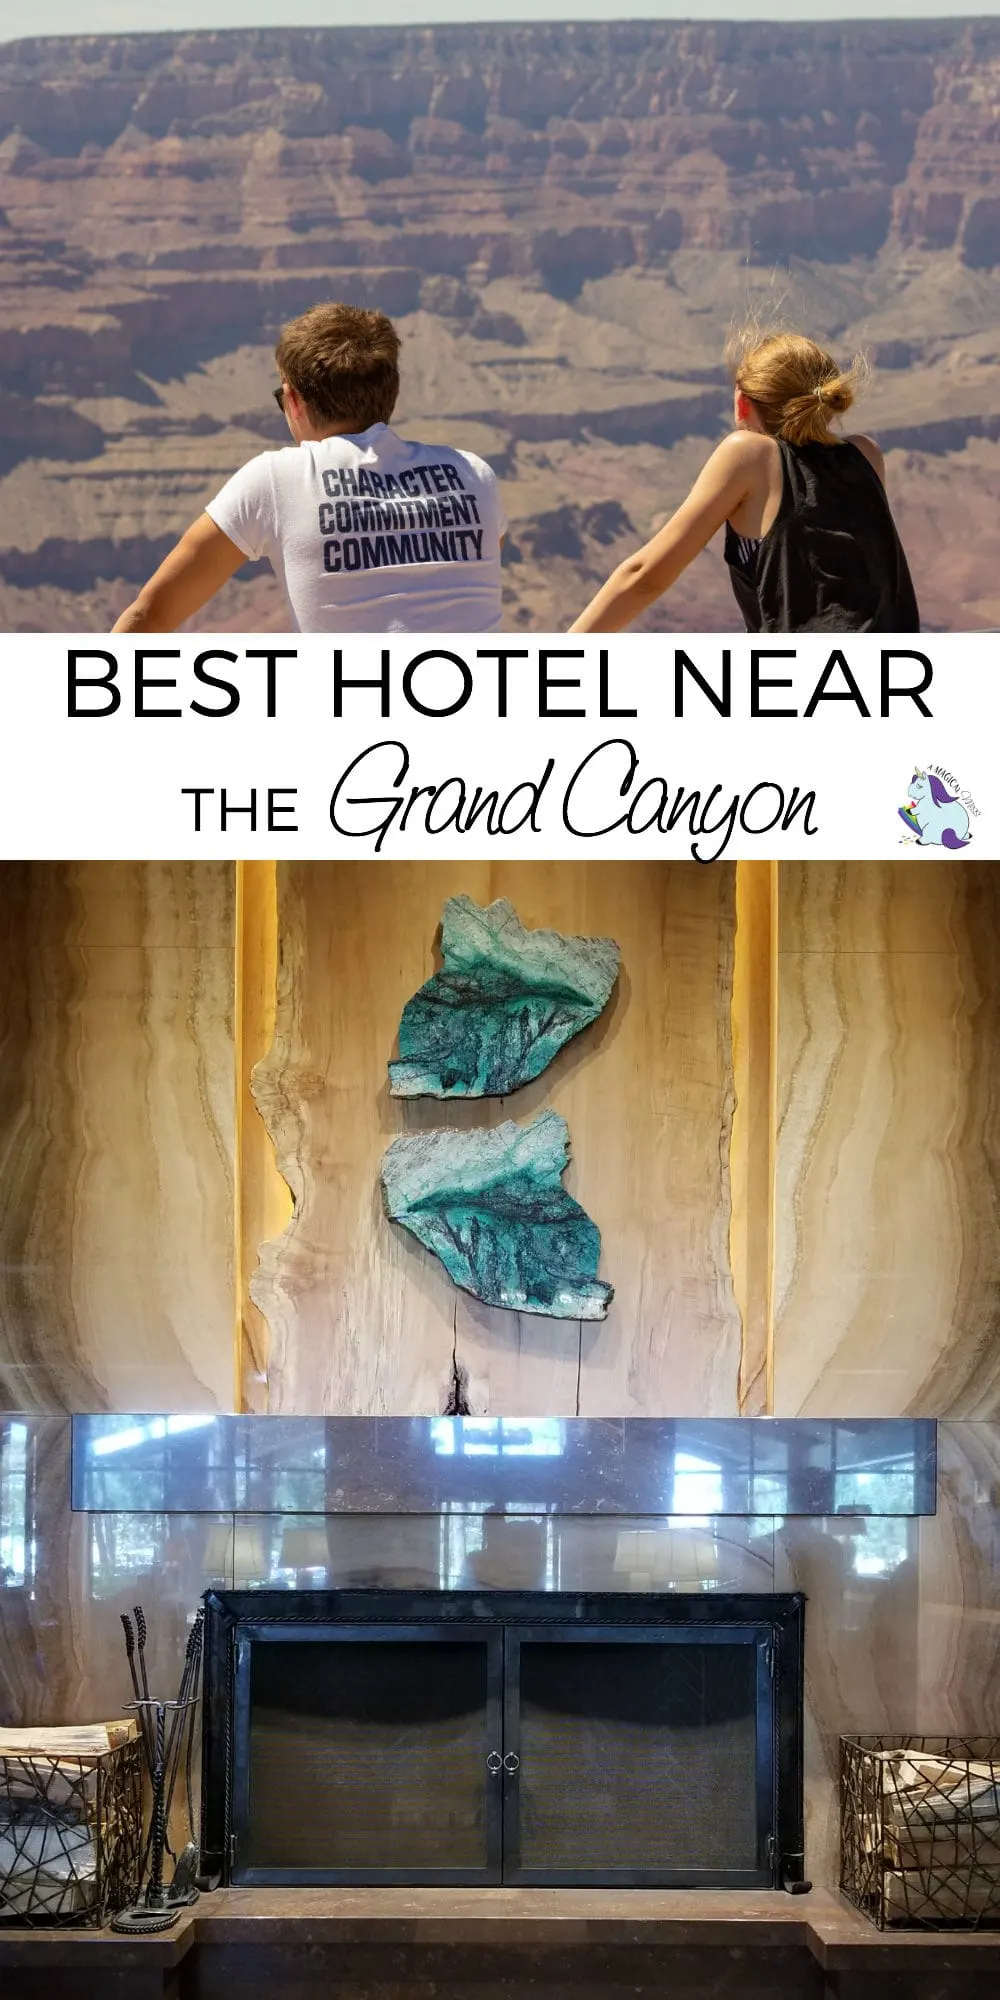 The best hotels near the Grand Canyon -- the top is Little America in Flagstaff